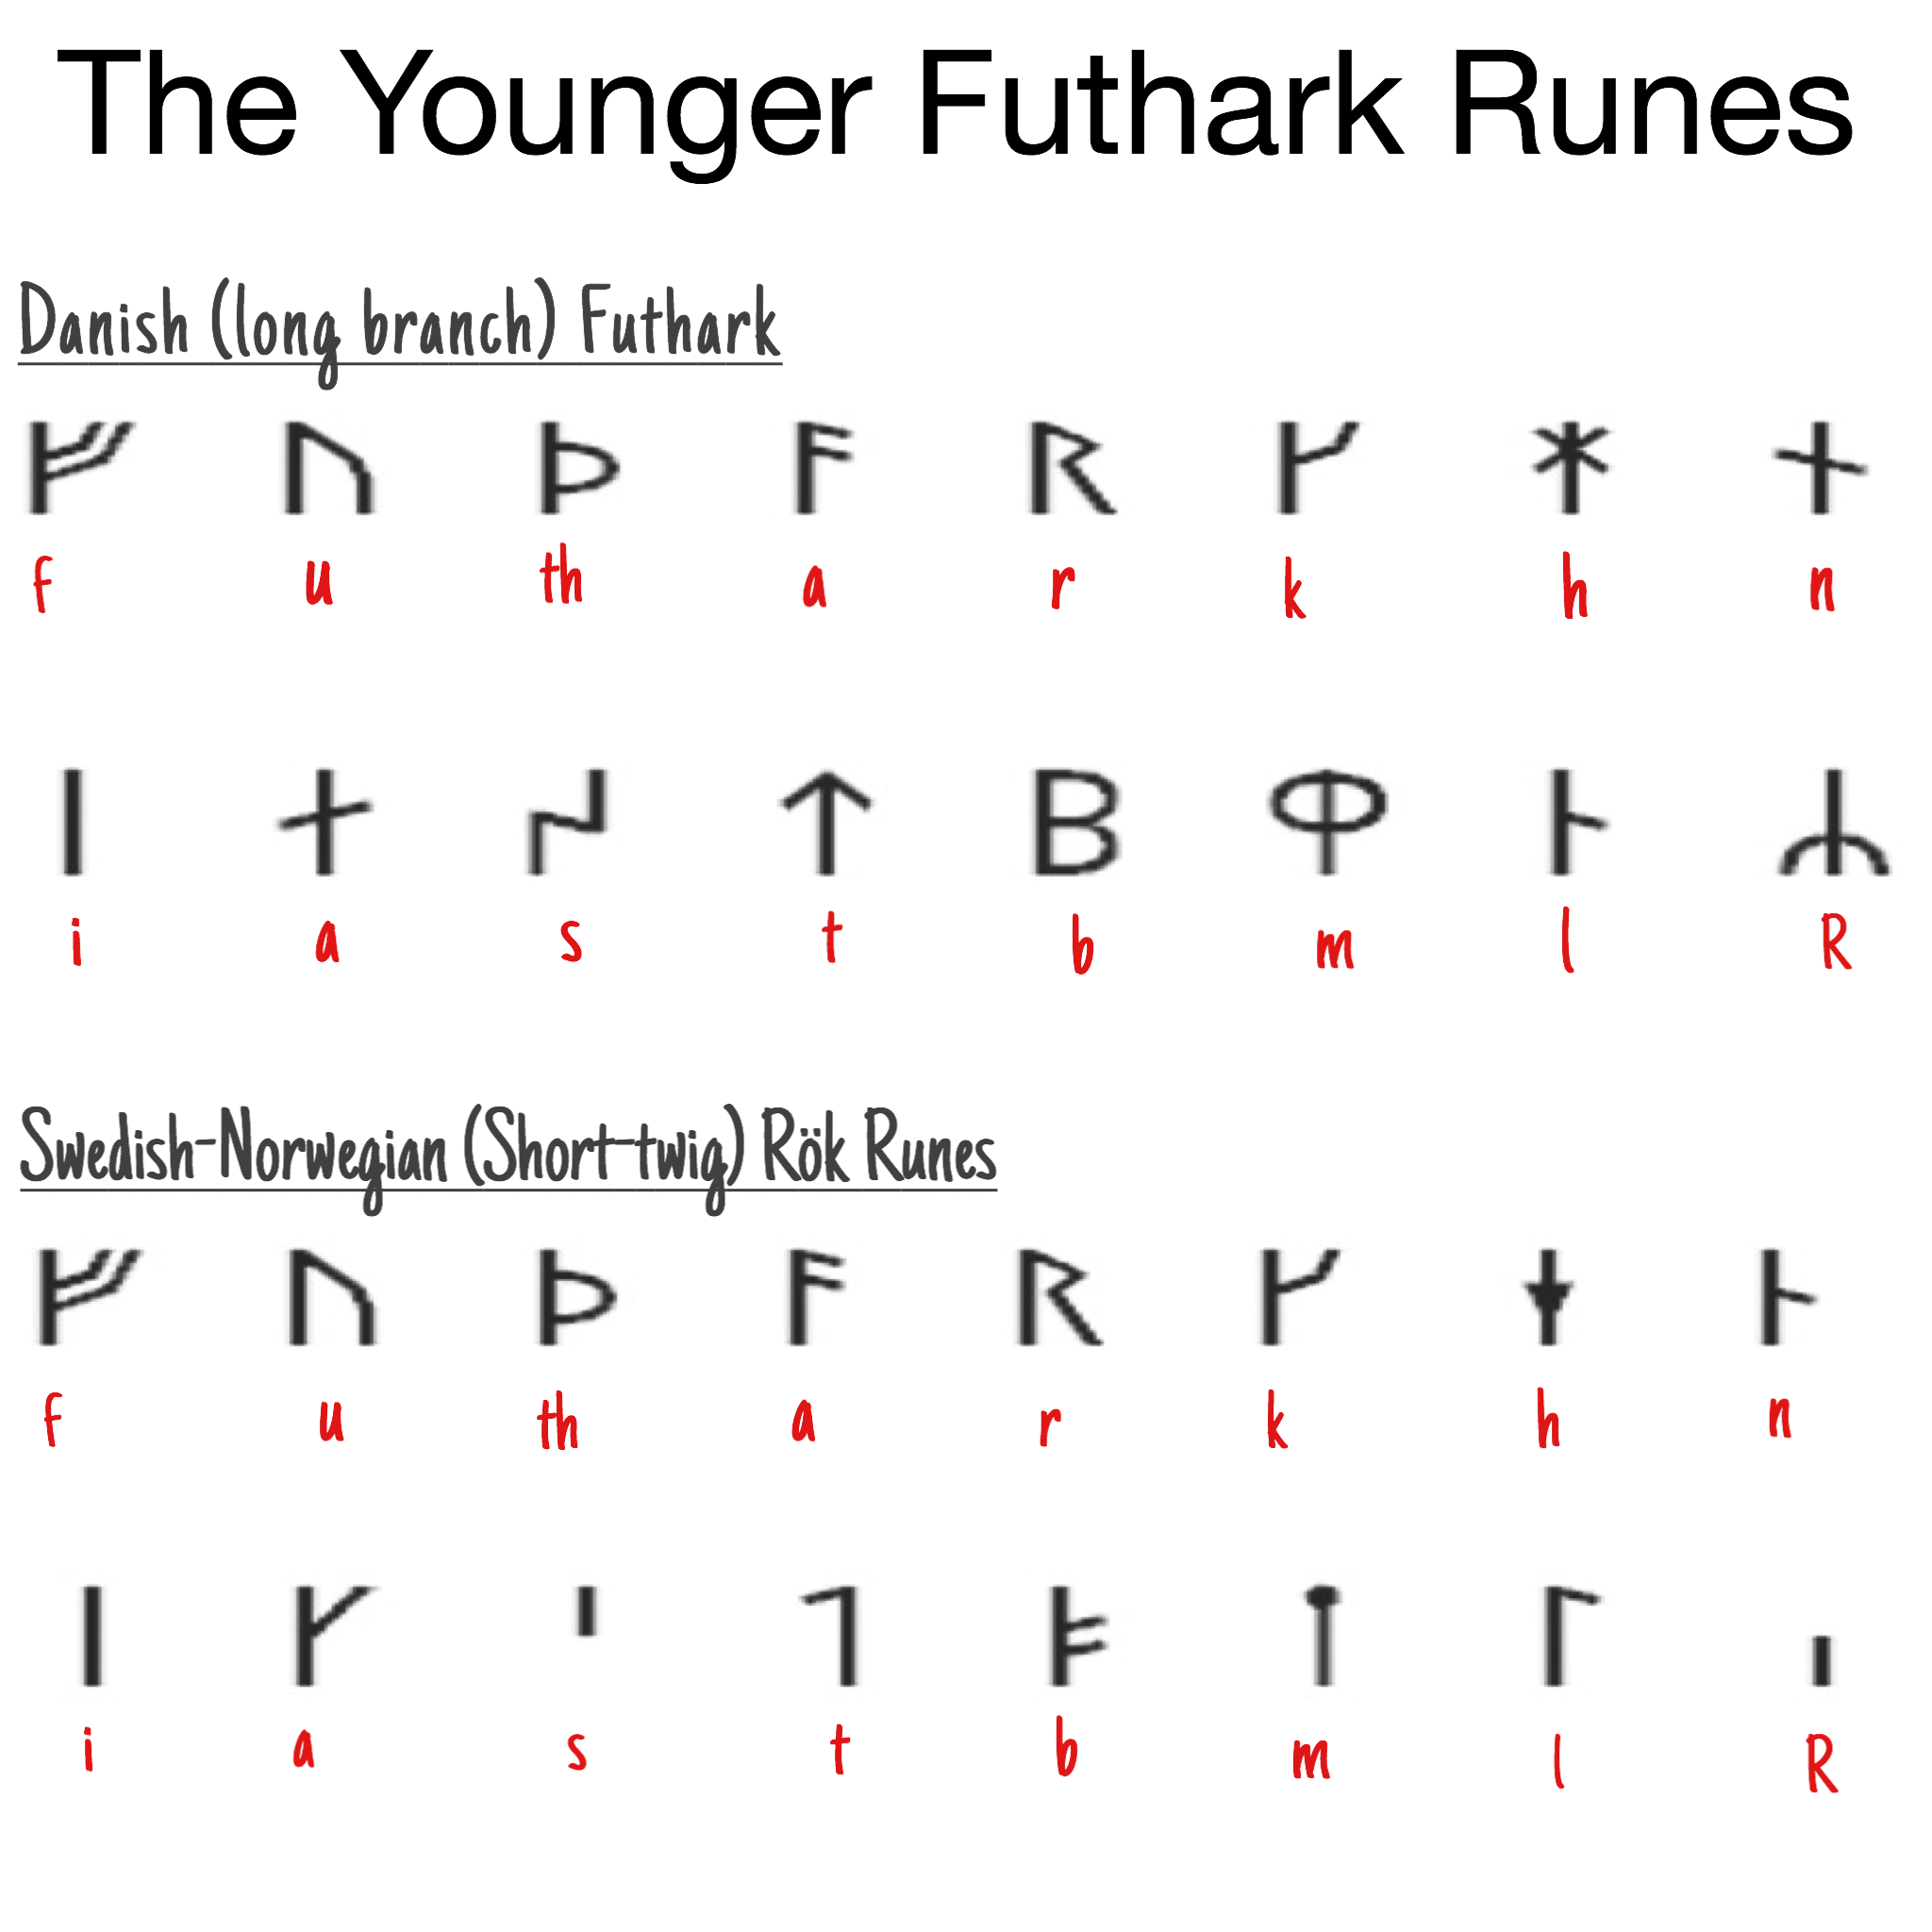 The Younger Futhark Runes - both long branch (Danish) and short-twig ....png